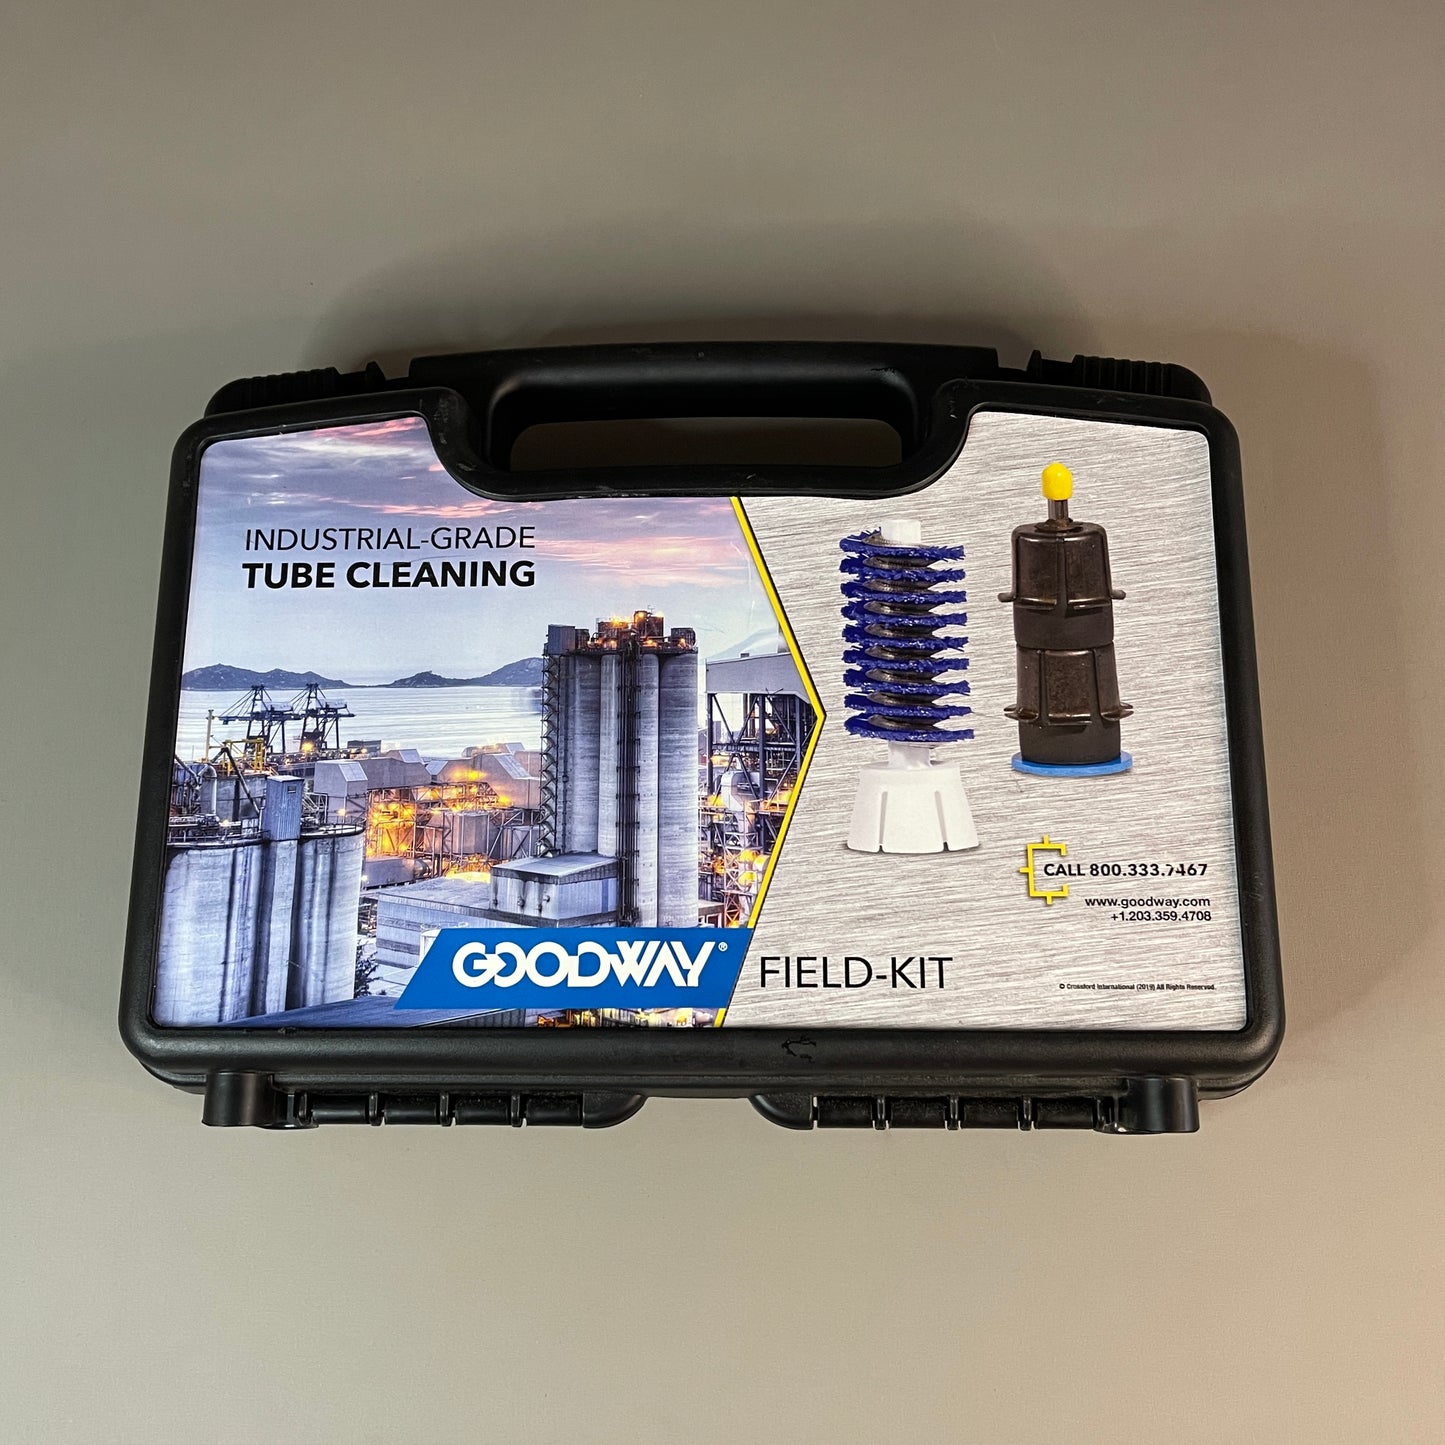 GOODWAY Industrial-Grade Tube Cleaning Field Kit 20 Pieces W/ Case (New)